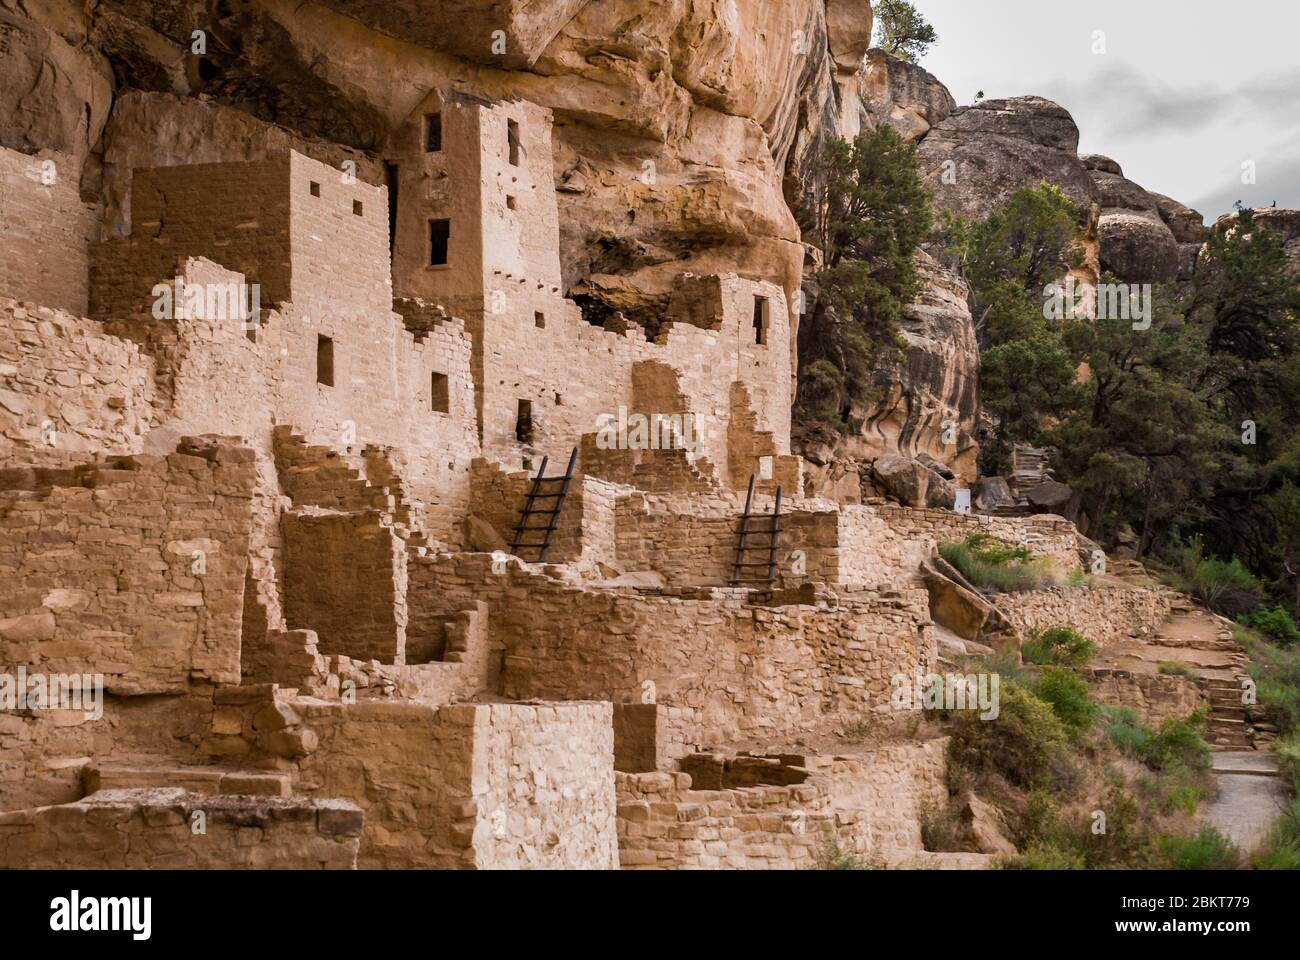 The Cliff Palace, the largest cliff dwelling in North America, located in Mesa Verde National Park, Colorado. Stock Photo